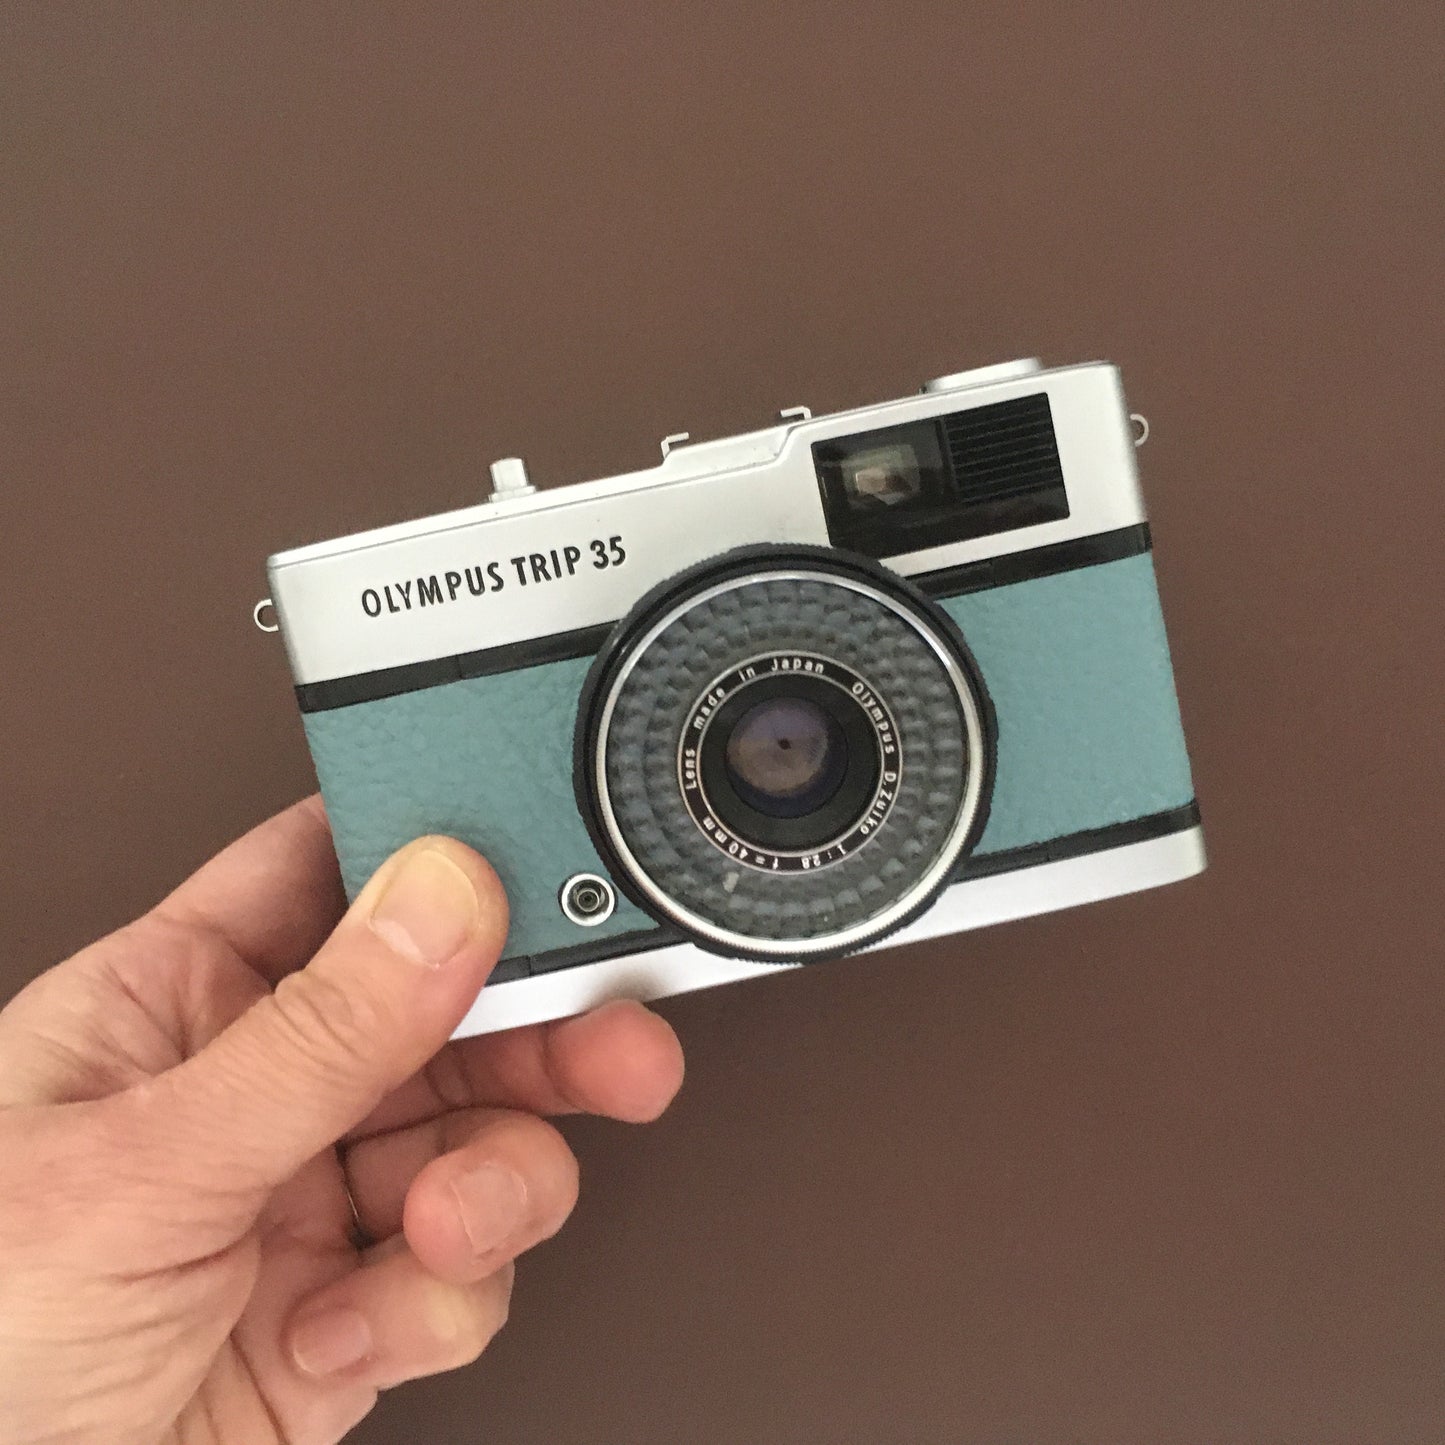 Olympus TRIP35  with mythical blue leather